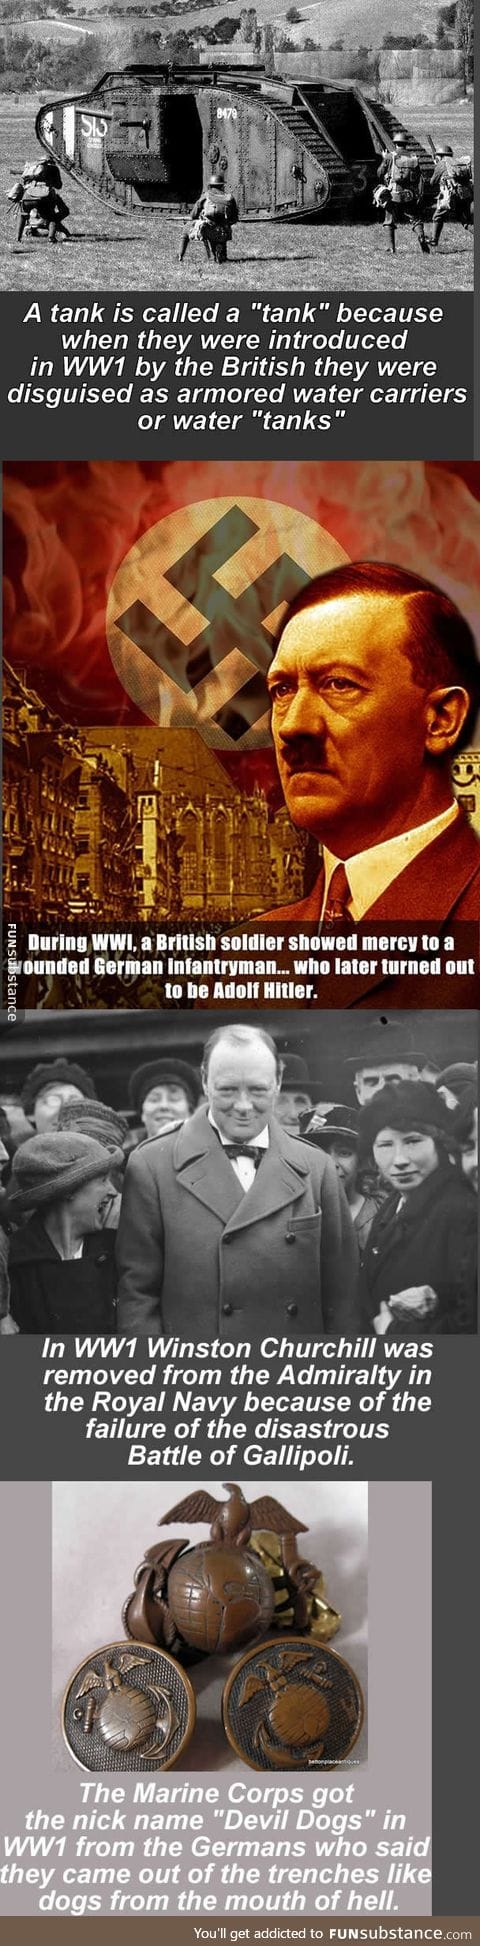 Random facts about WW1